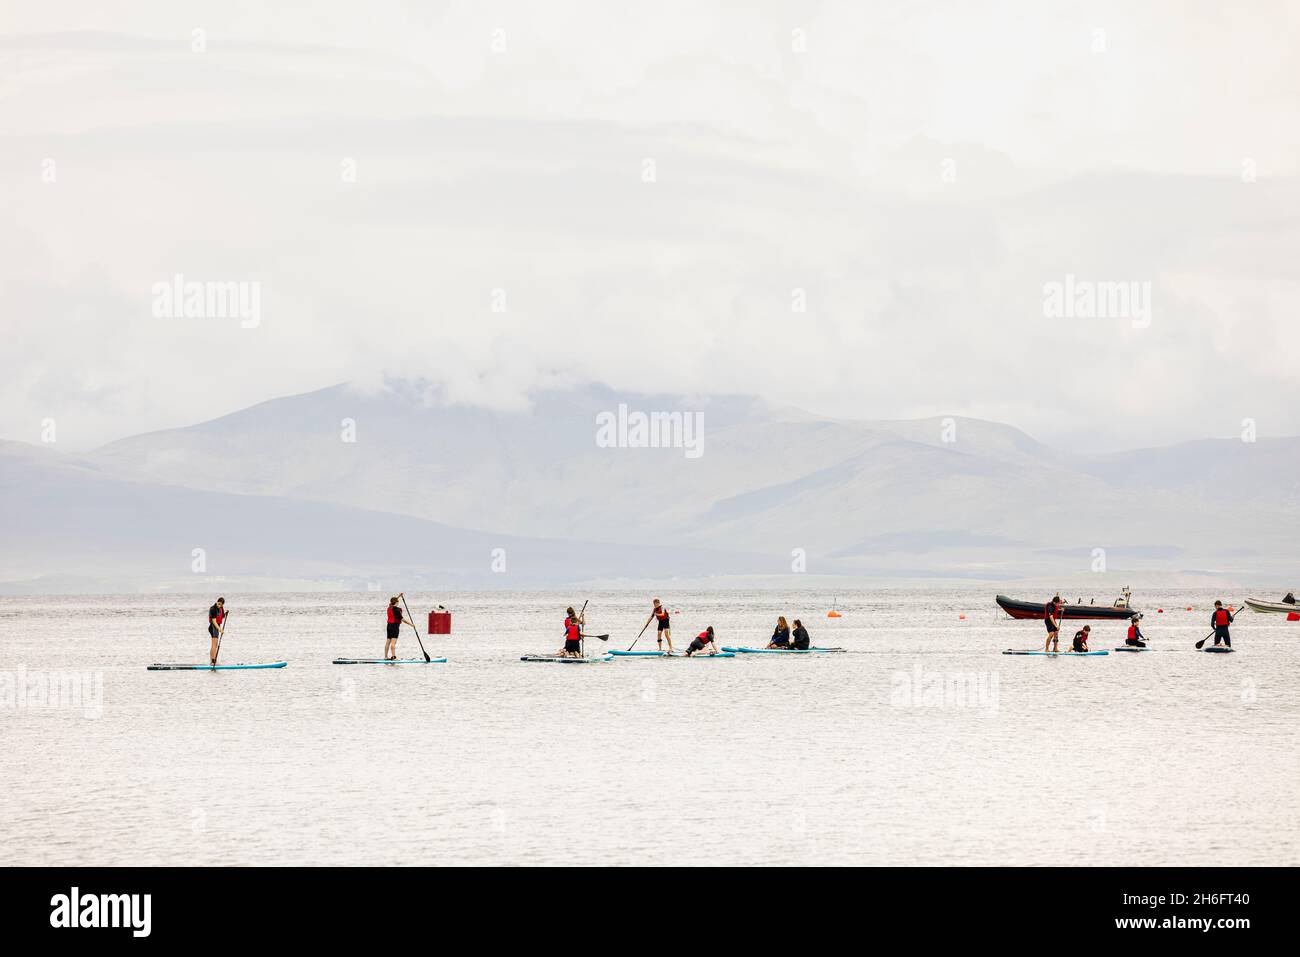 Stand up surfers on SUP boards offshore at Old Head beach, Louisburgh, County Mayo, Ireland Stock Photo